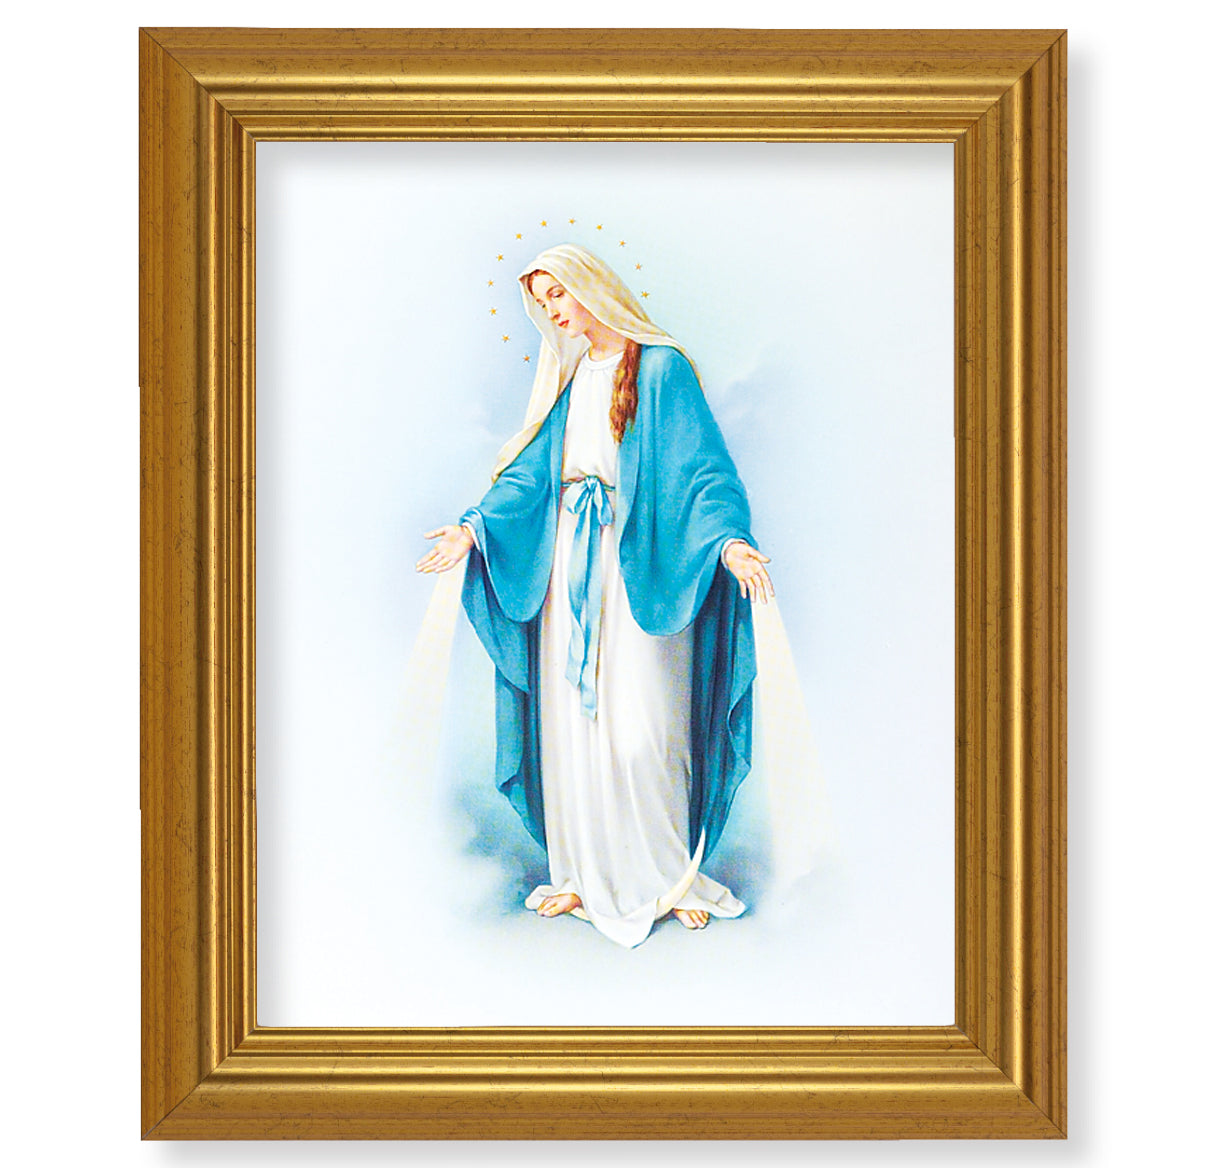 Our Lady of Grace Picture Framed Wall Art Decor, Large, Antique Gold-Leaf Classic Frame